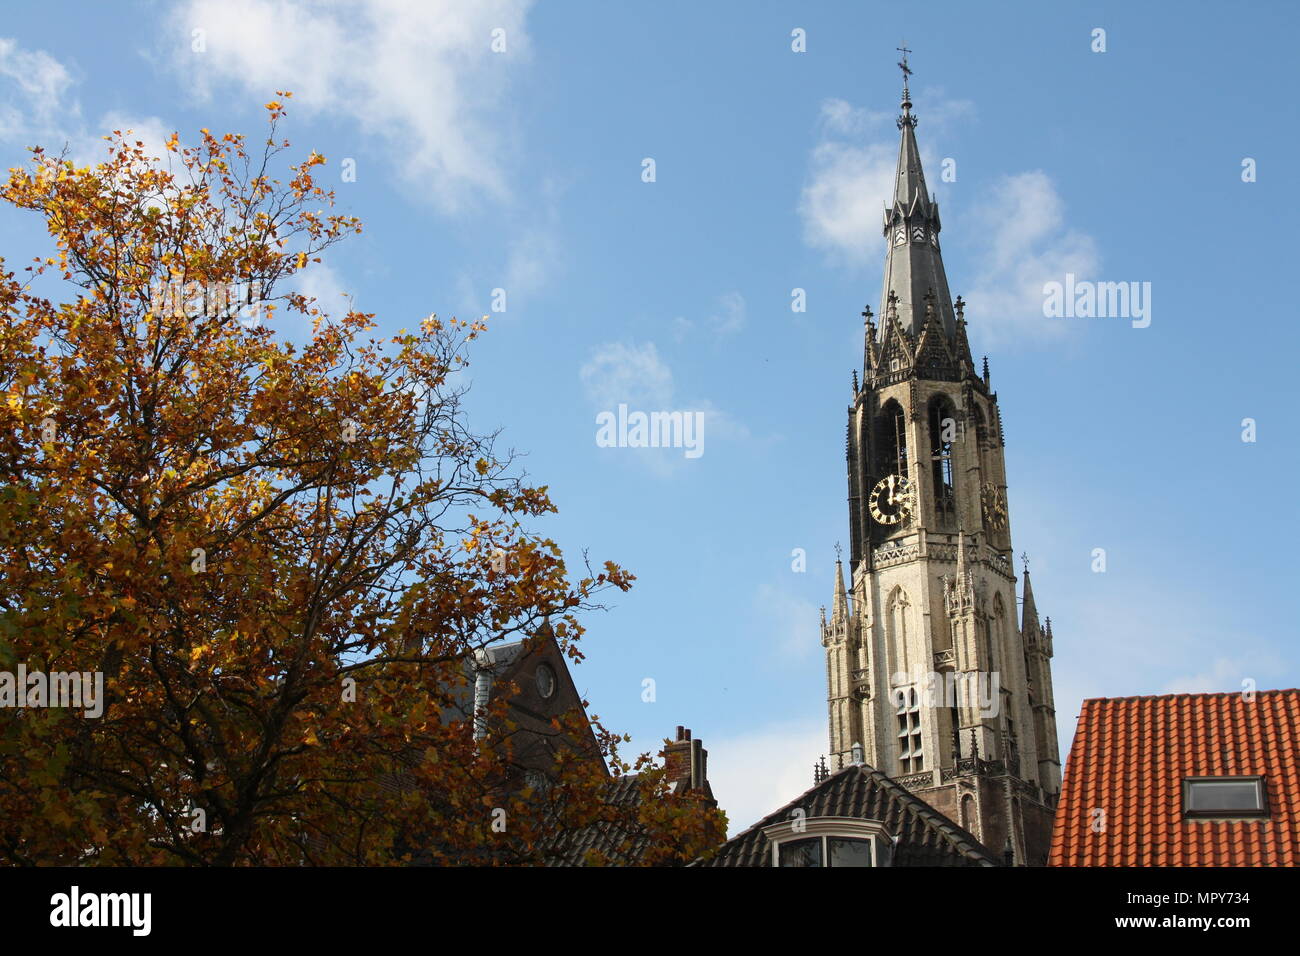 The Nieuwe Kerk - the burial place of the Dutch royal family - in Delft, Netherlands Stock Photo